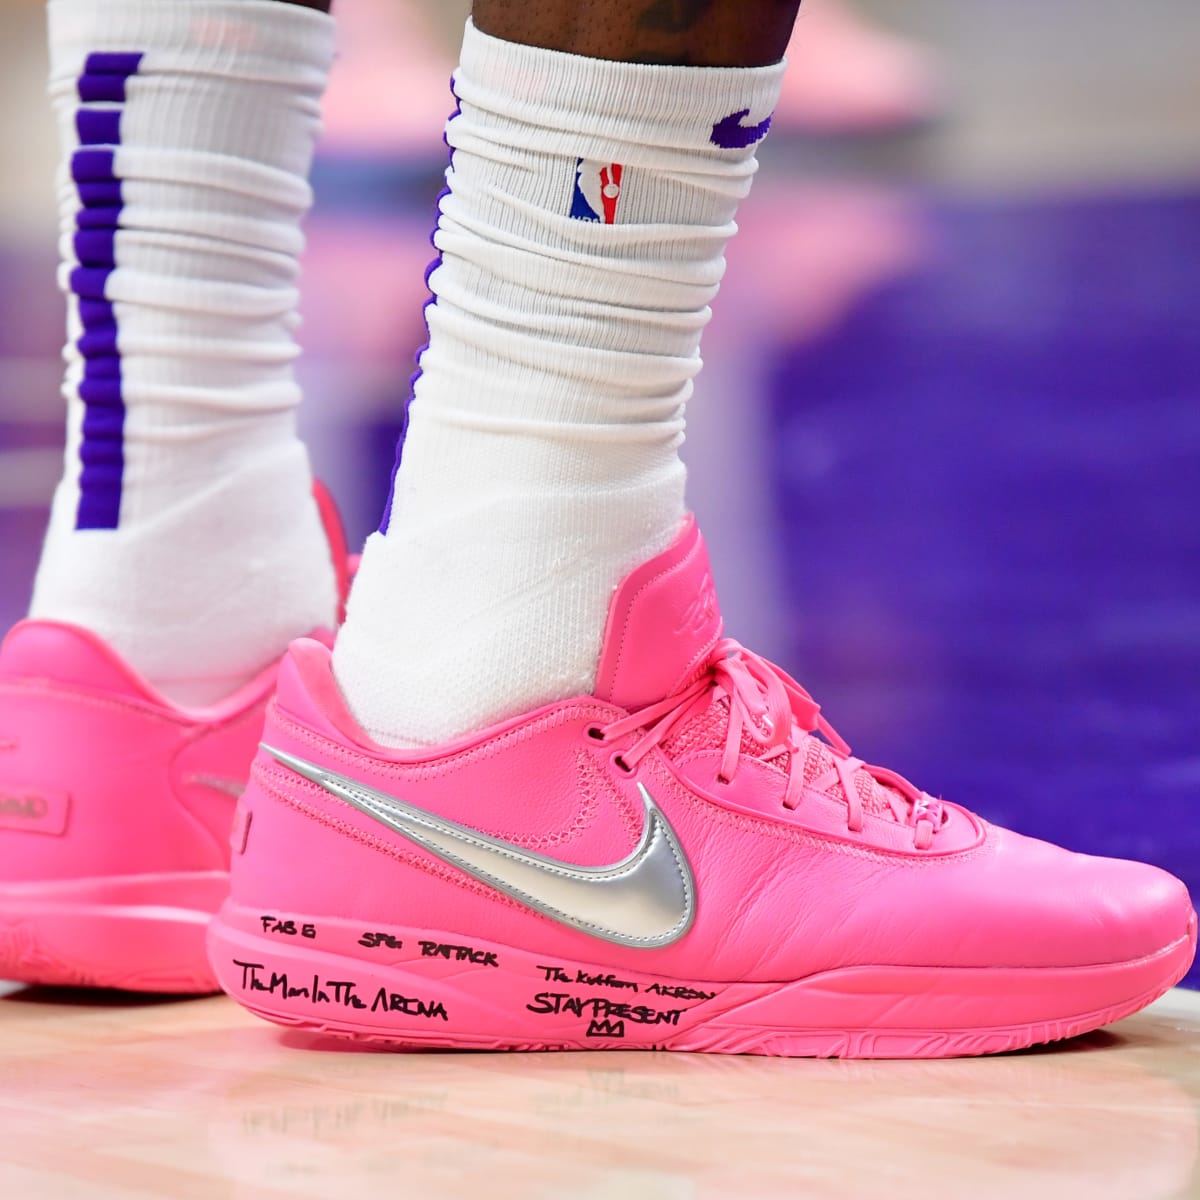 6 Times Sneakers Stole the Show at the NBA All-Star Game